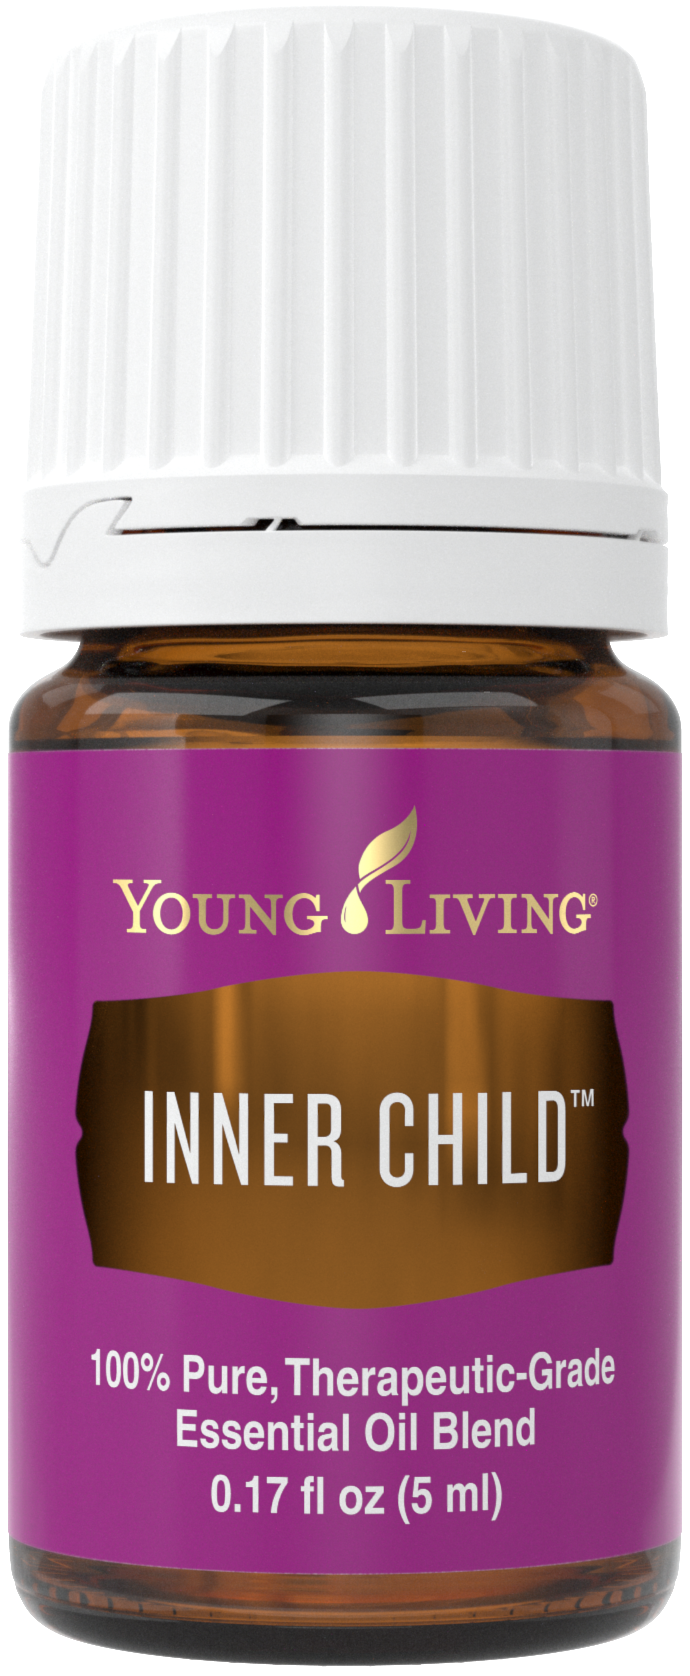 Inner Child 5ml Silo.png